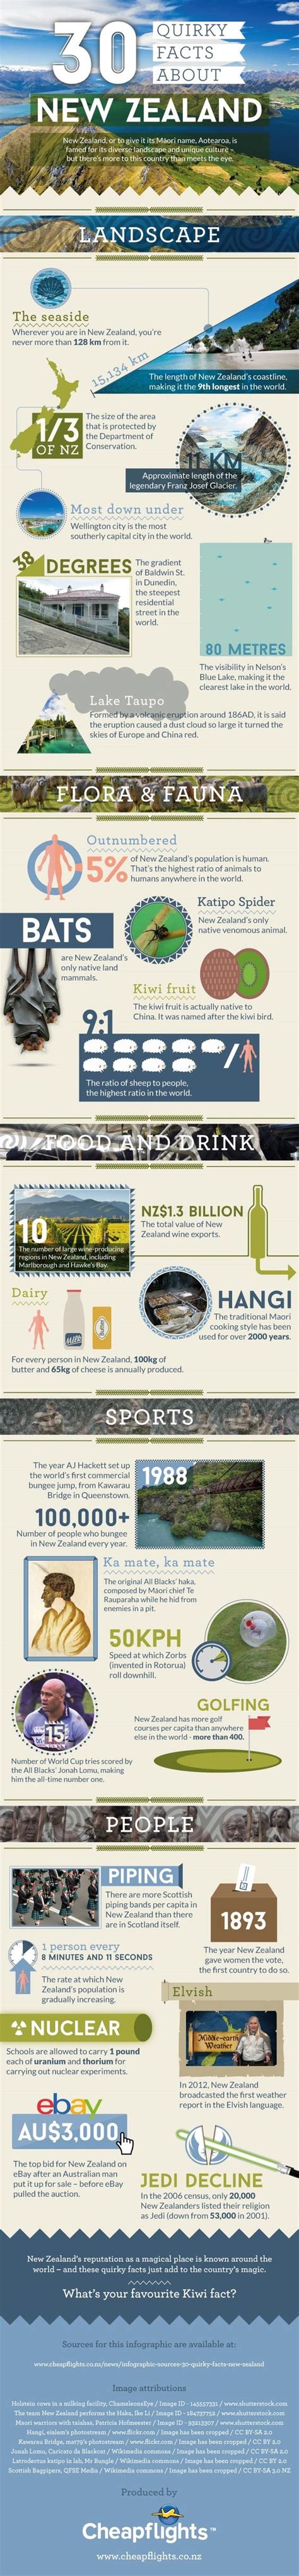 30 Quirky Facts About New Zealand Infographic New Zealand Travel